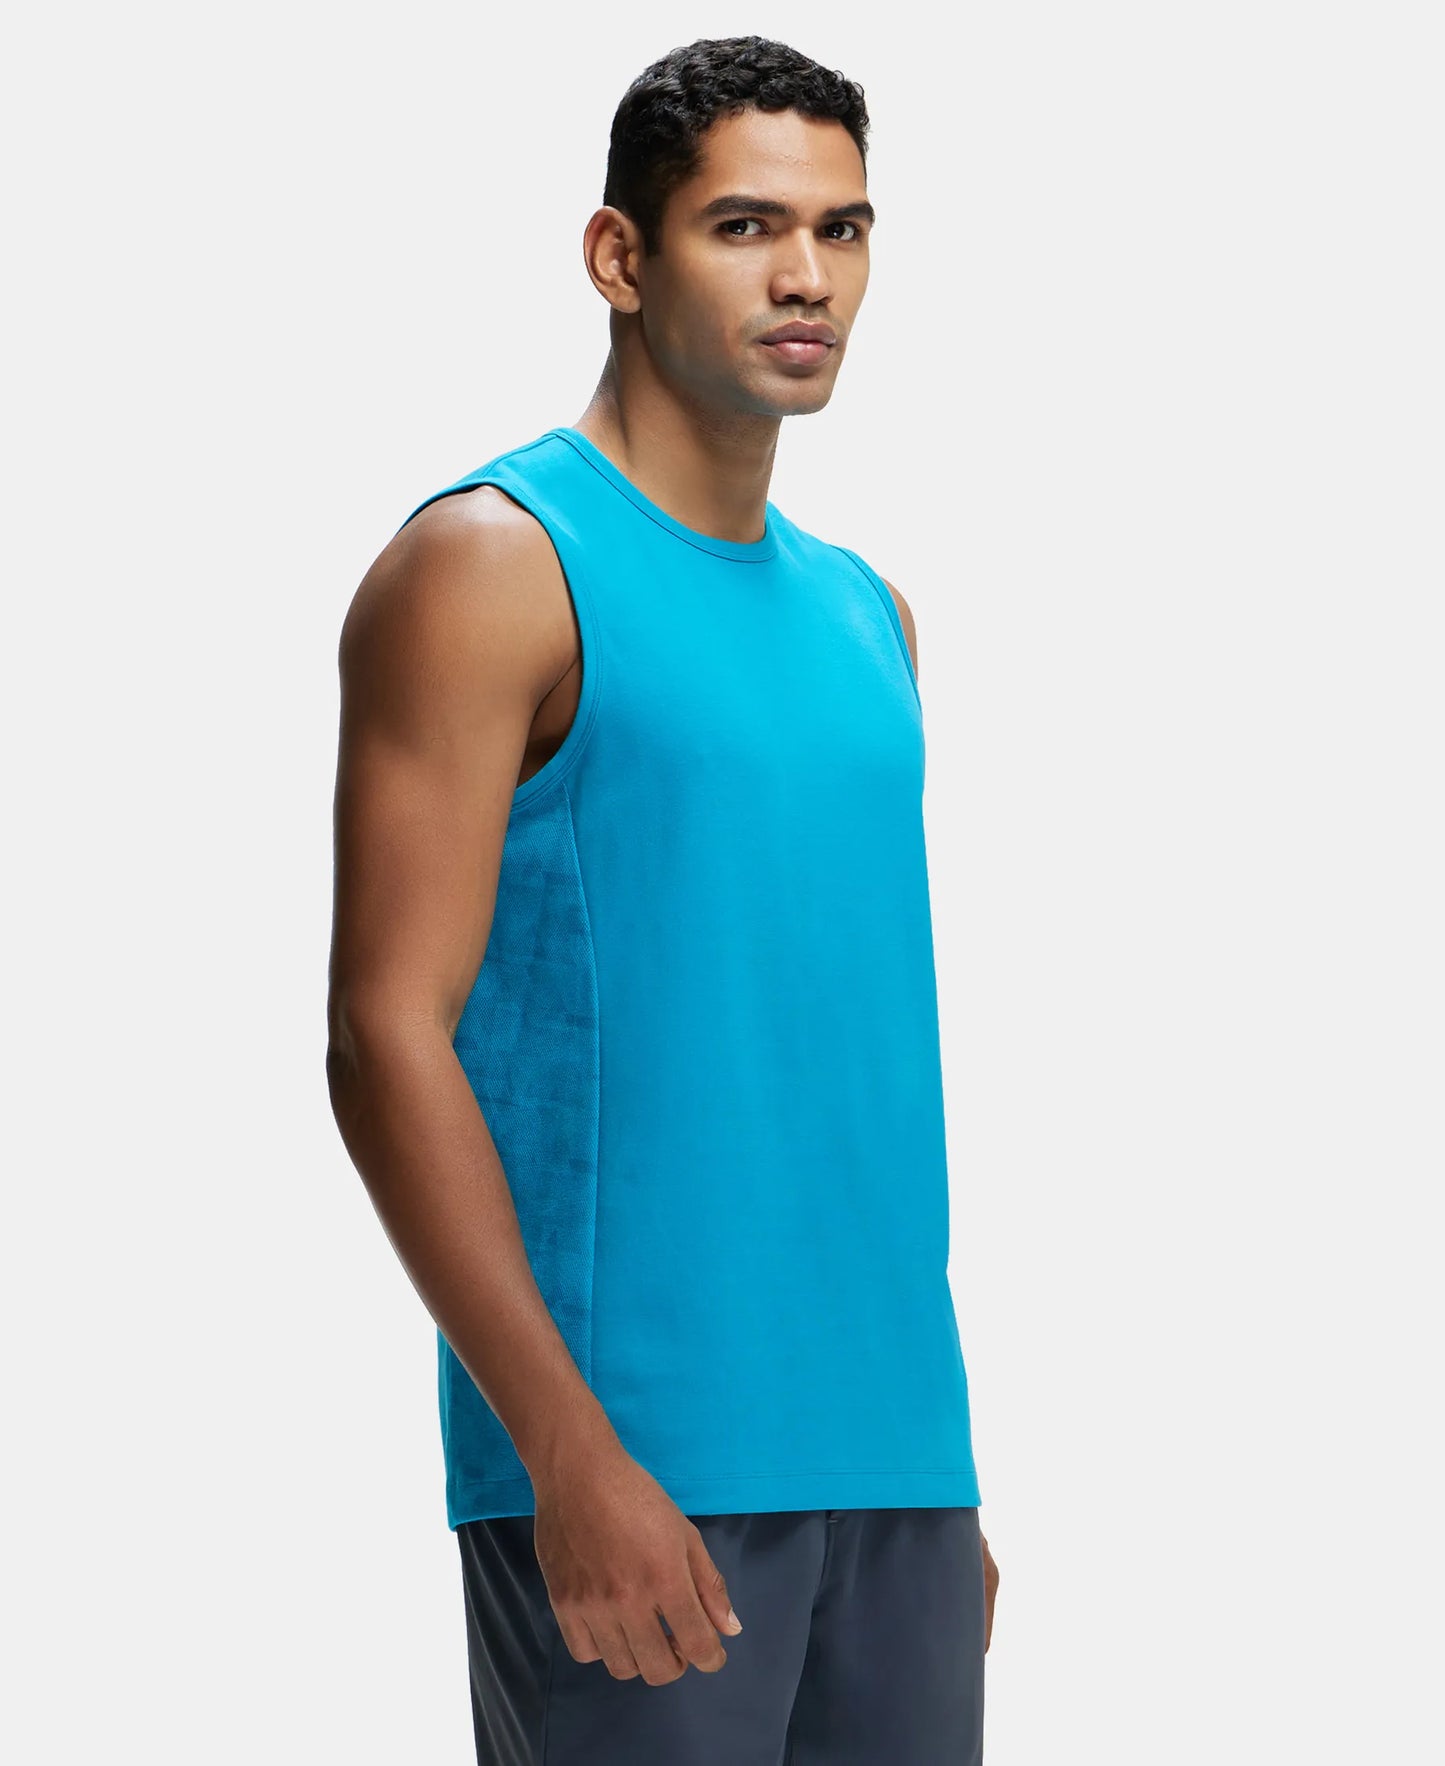 Super Combed Cotton Blend Round Neck Muscle Tee with Breathable Mesh - Caribbean Sea-2